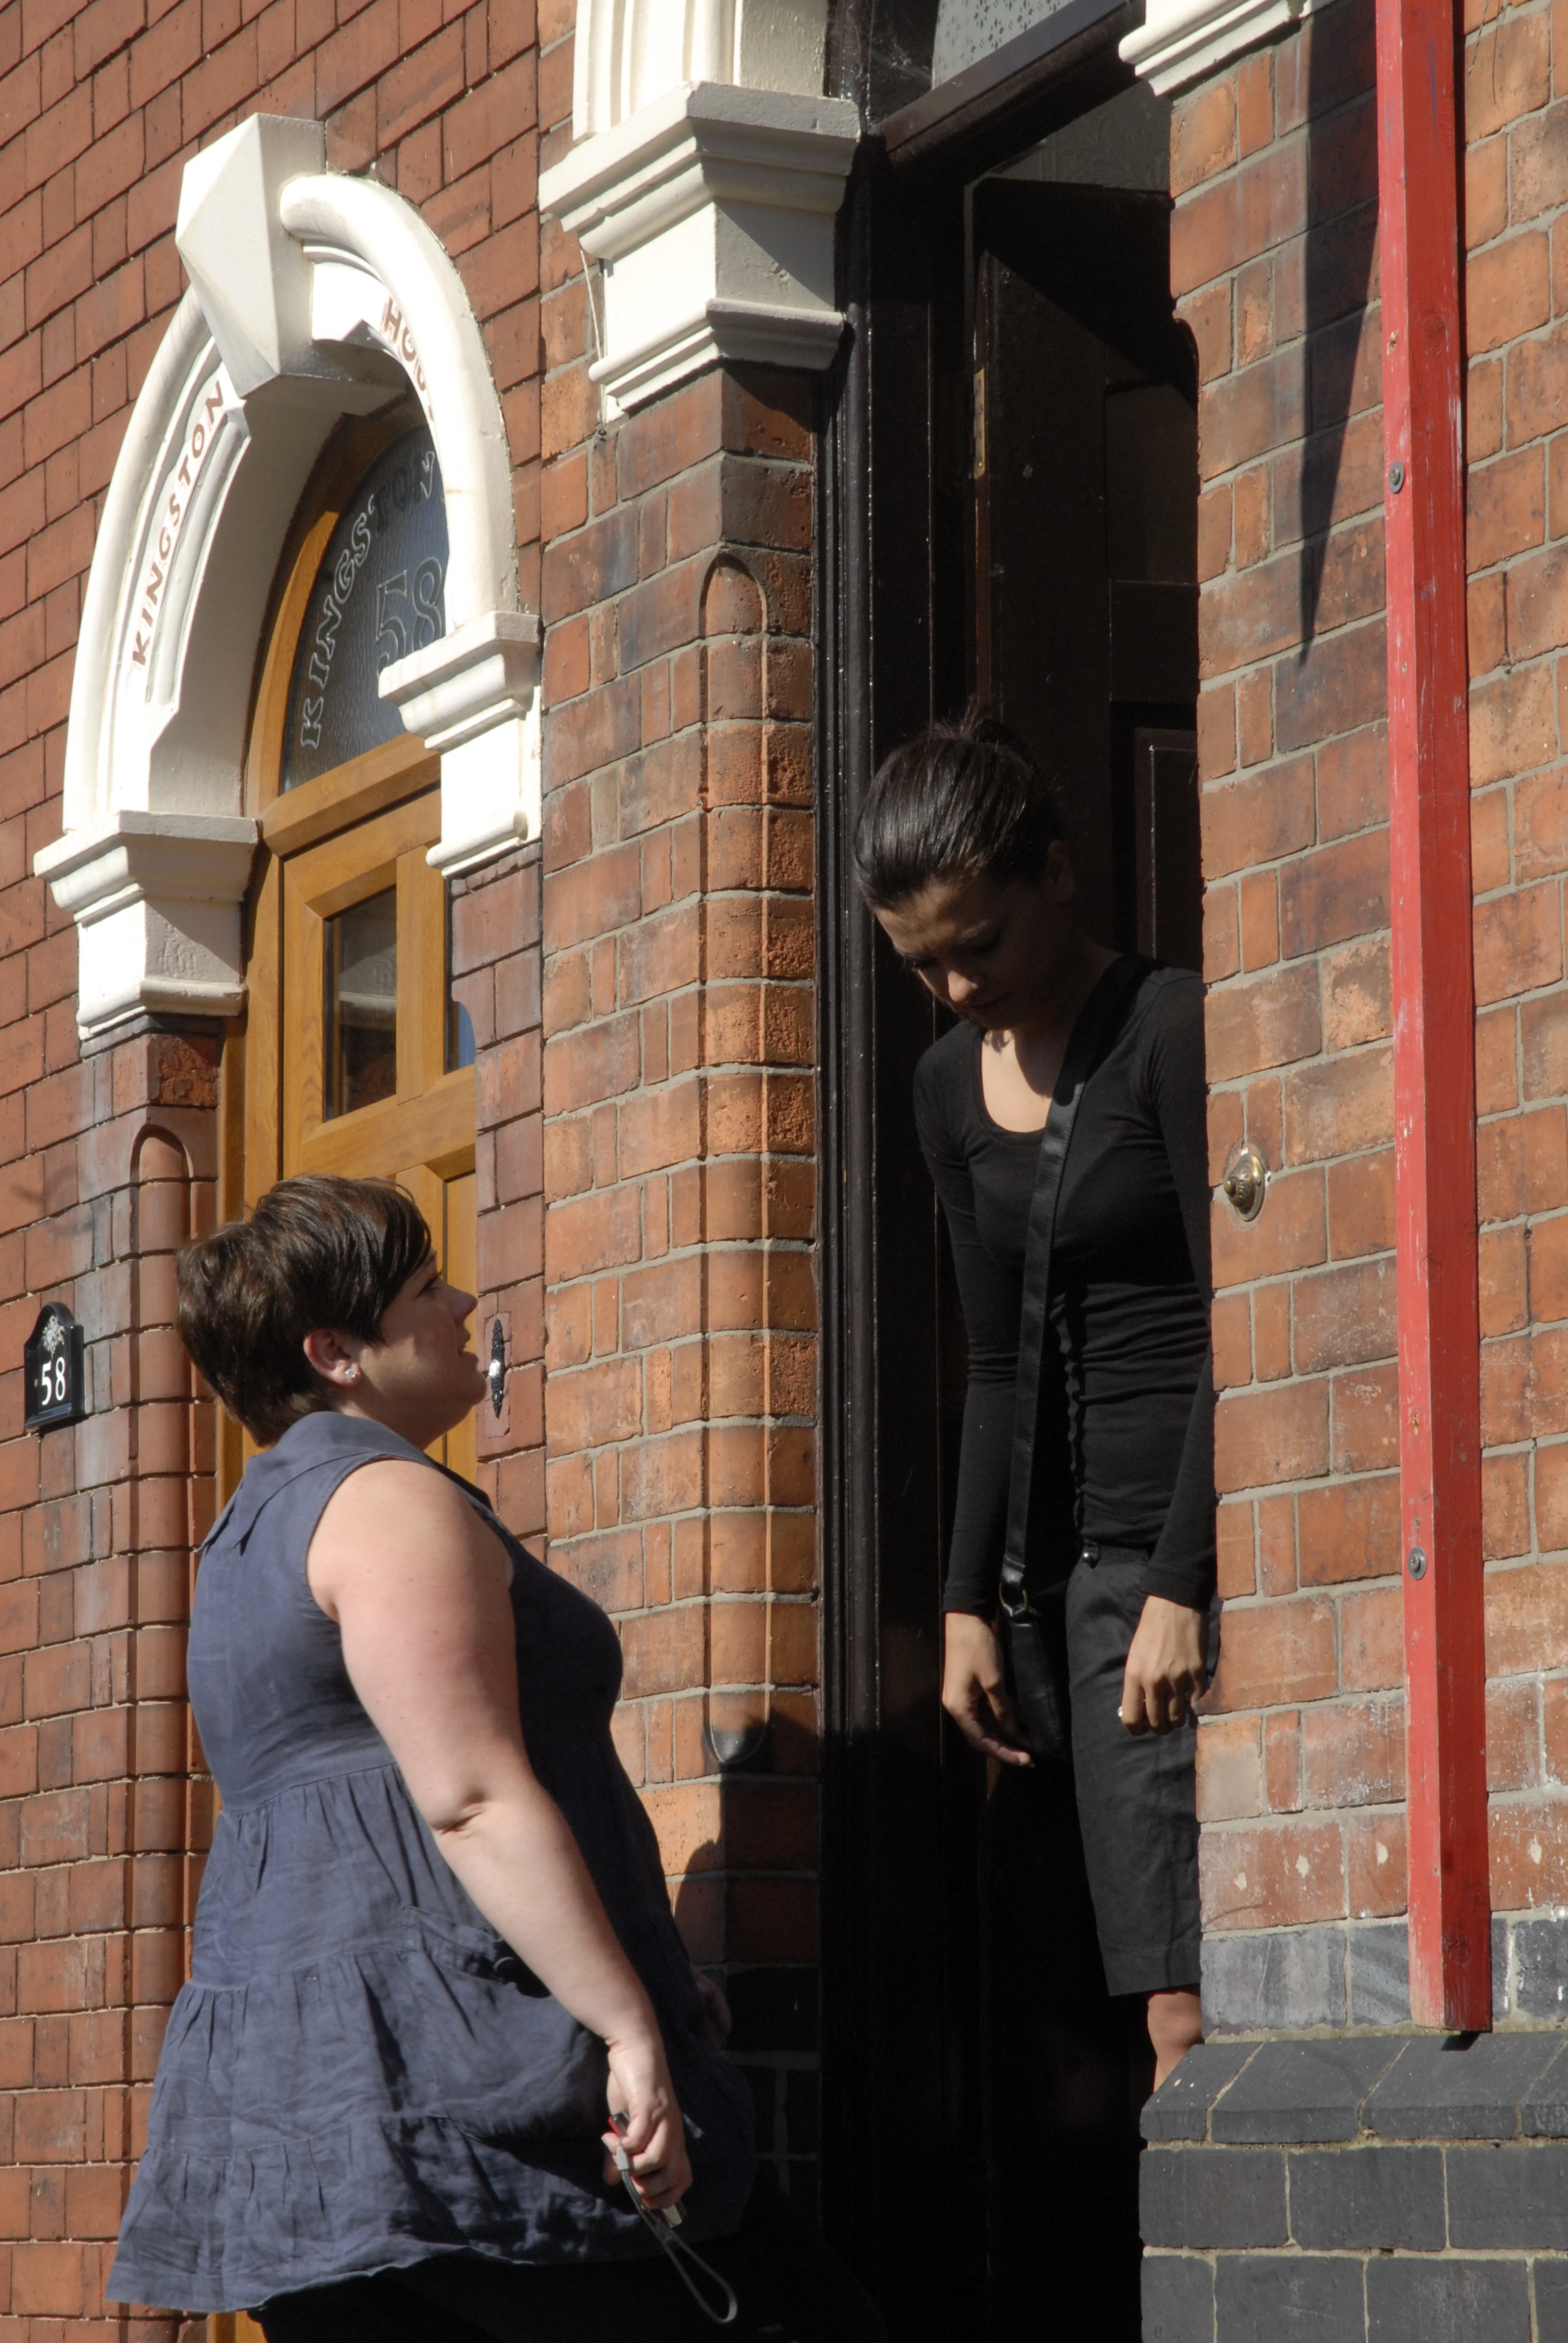 Chrissa Maund, producer, on the set of The Musician 2009 with lead actress Francesca Kingdon.